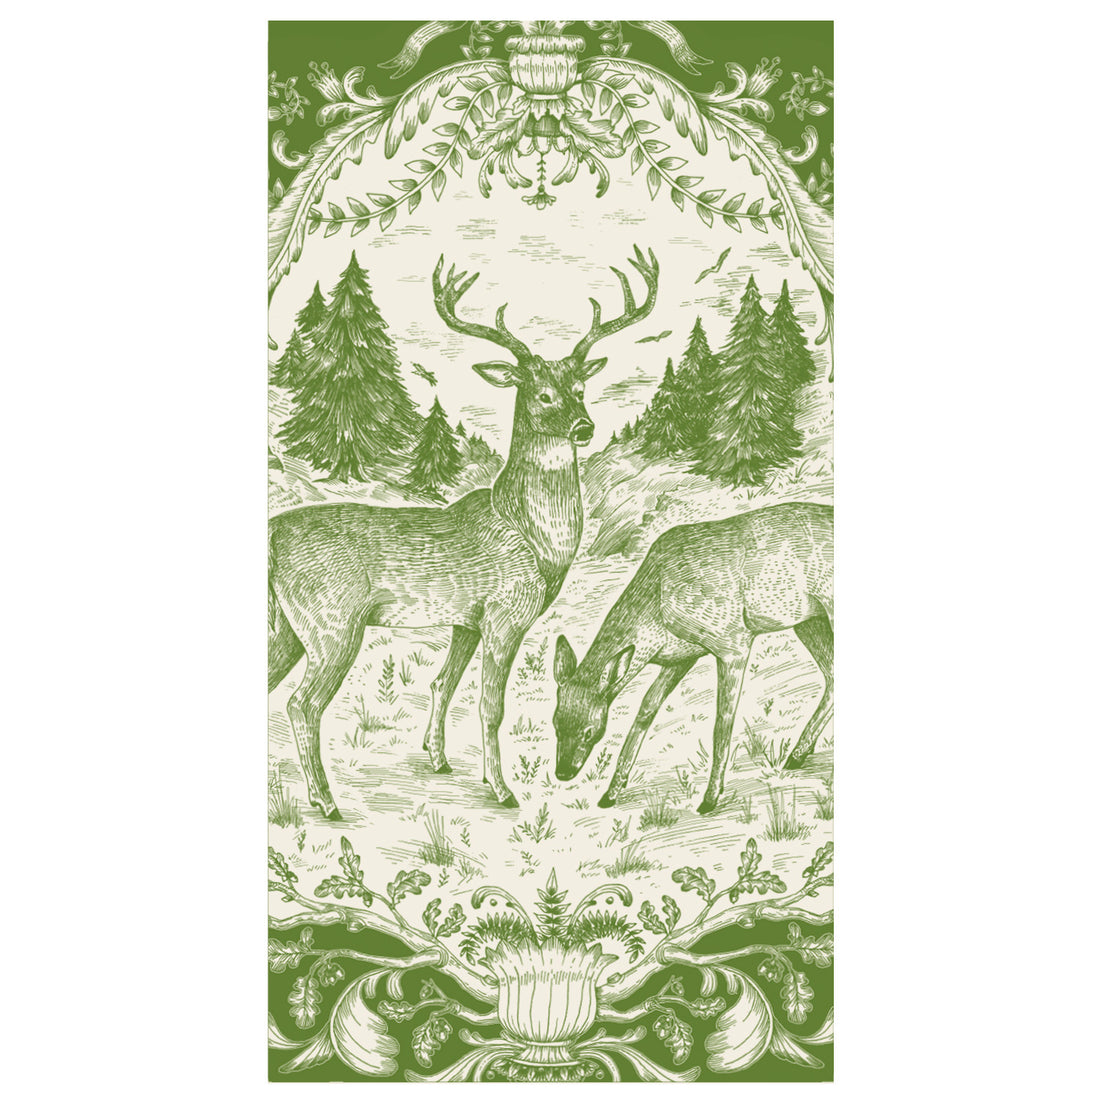 A rectangle guest napkin featuring a toile-style illustration of a male and female deer surrounded by detailed filigree, in monochrome green on a white background.